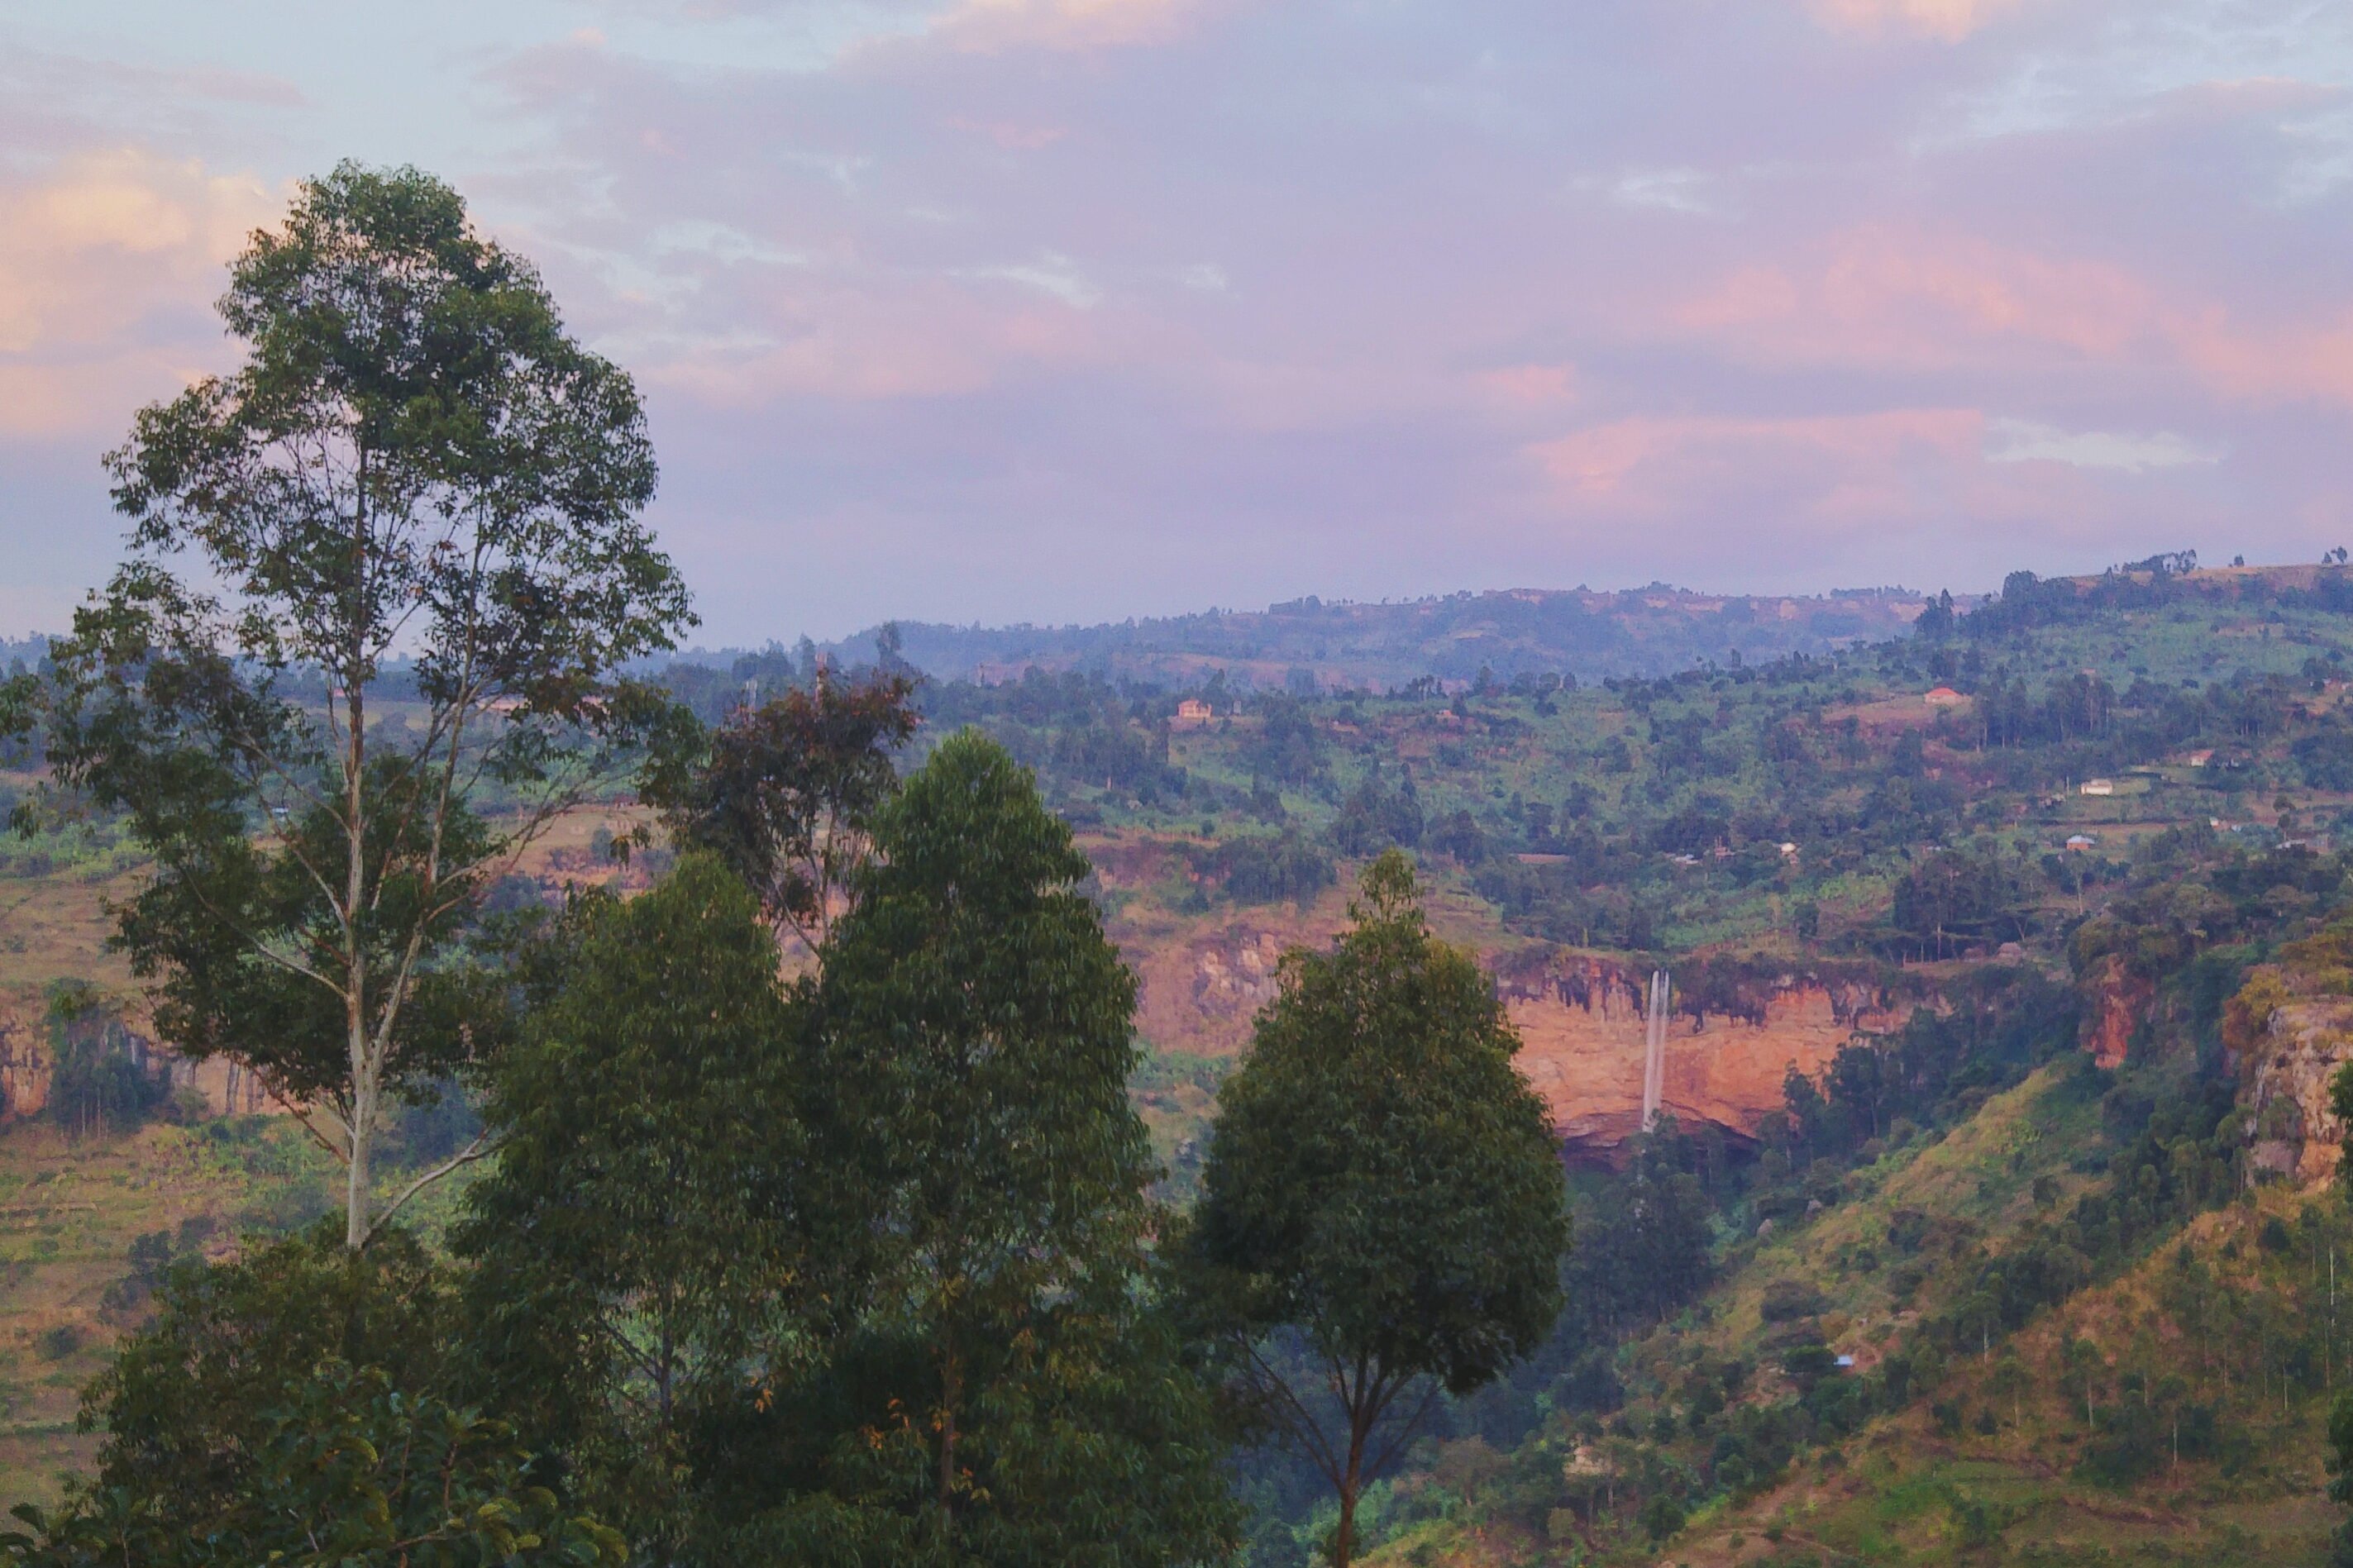 Sipi Falls, Uganda- the view from our hostel window. (We stayed at the Crow's Nest.)